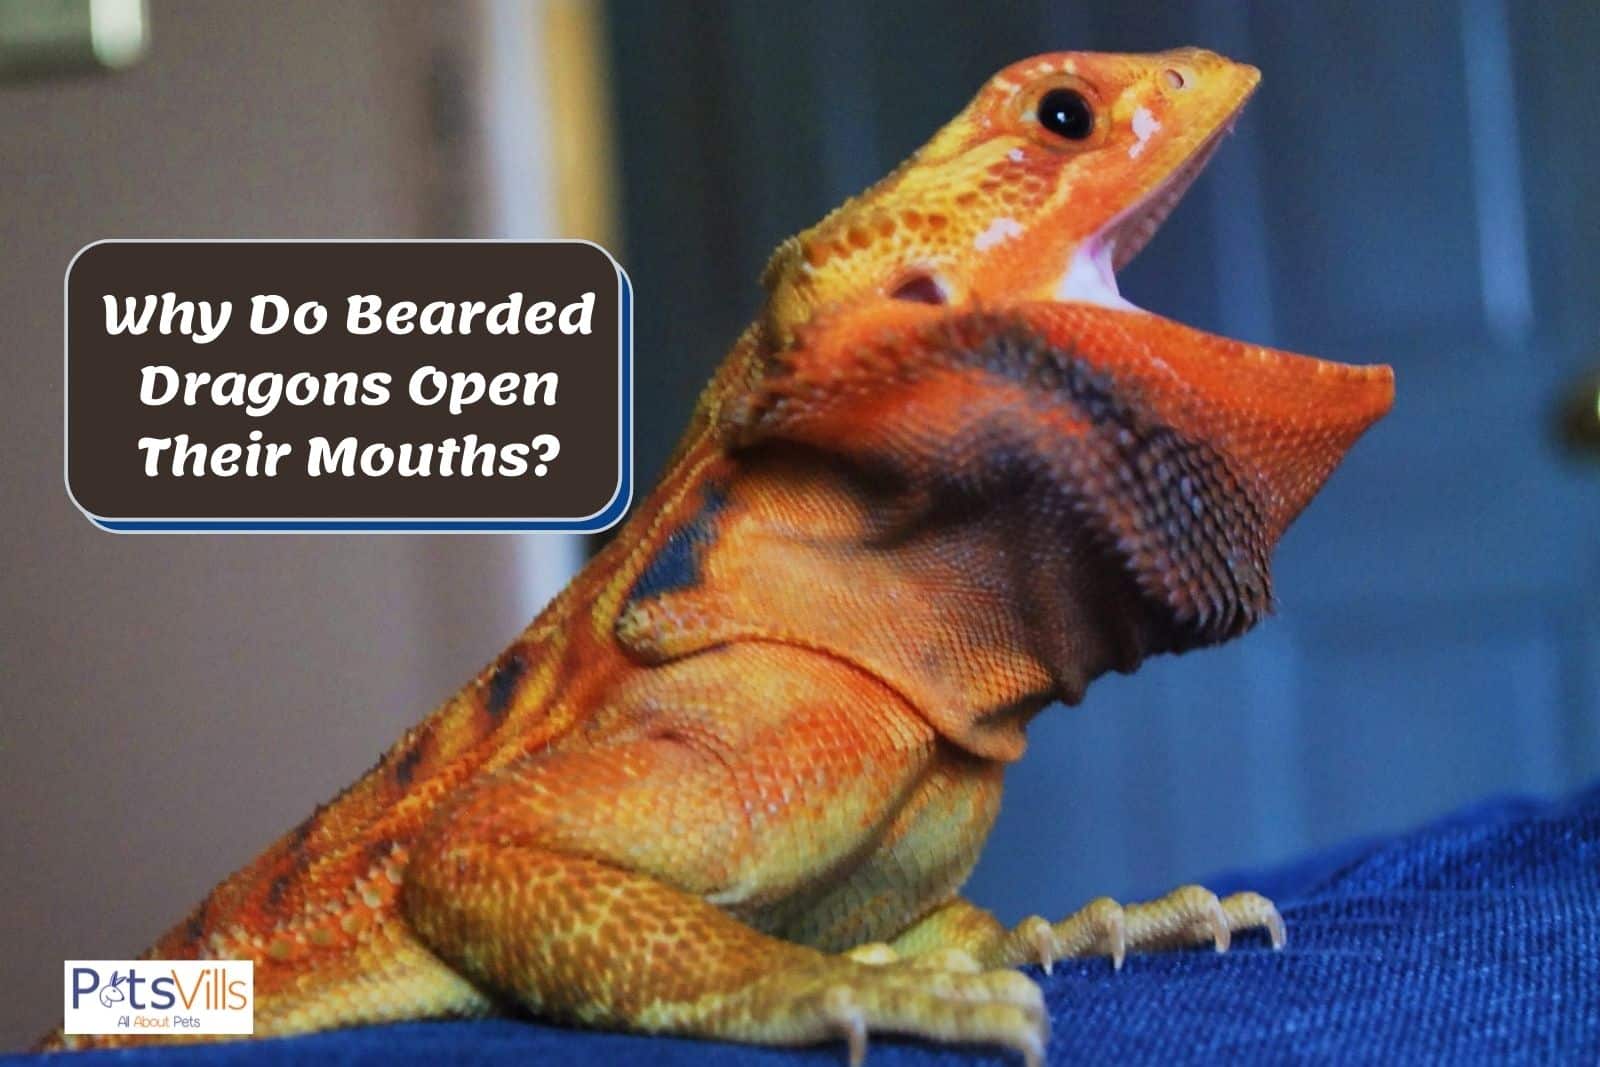 a bearded dragon mouth open